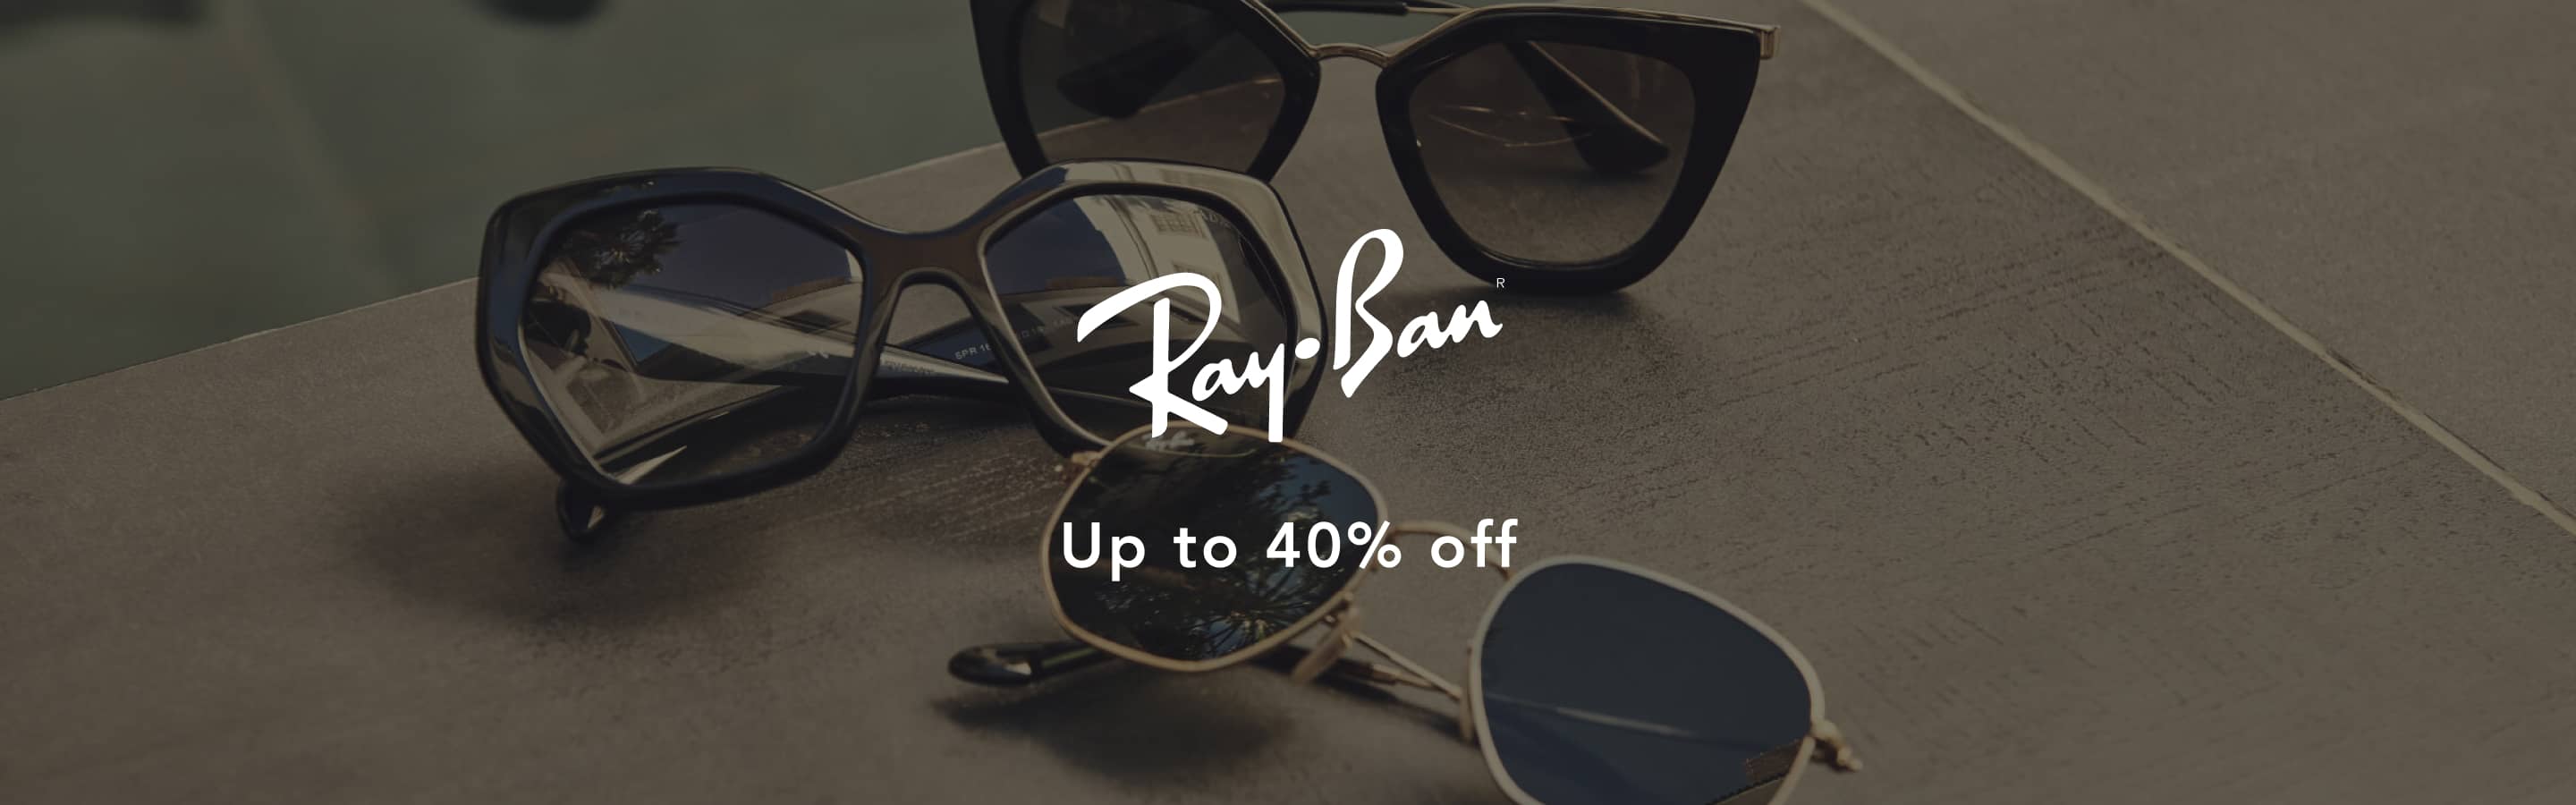 Ray Ban Outlet | Offers on Sunglasses, Eyewear & more | Secret Sales